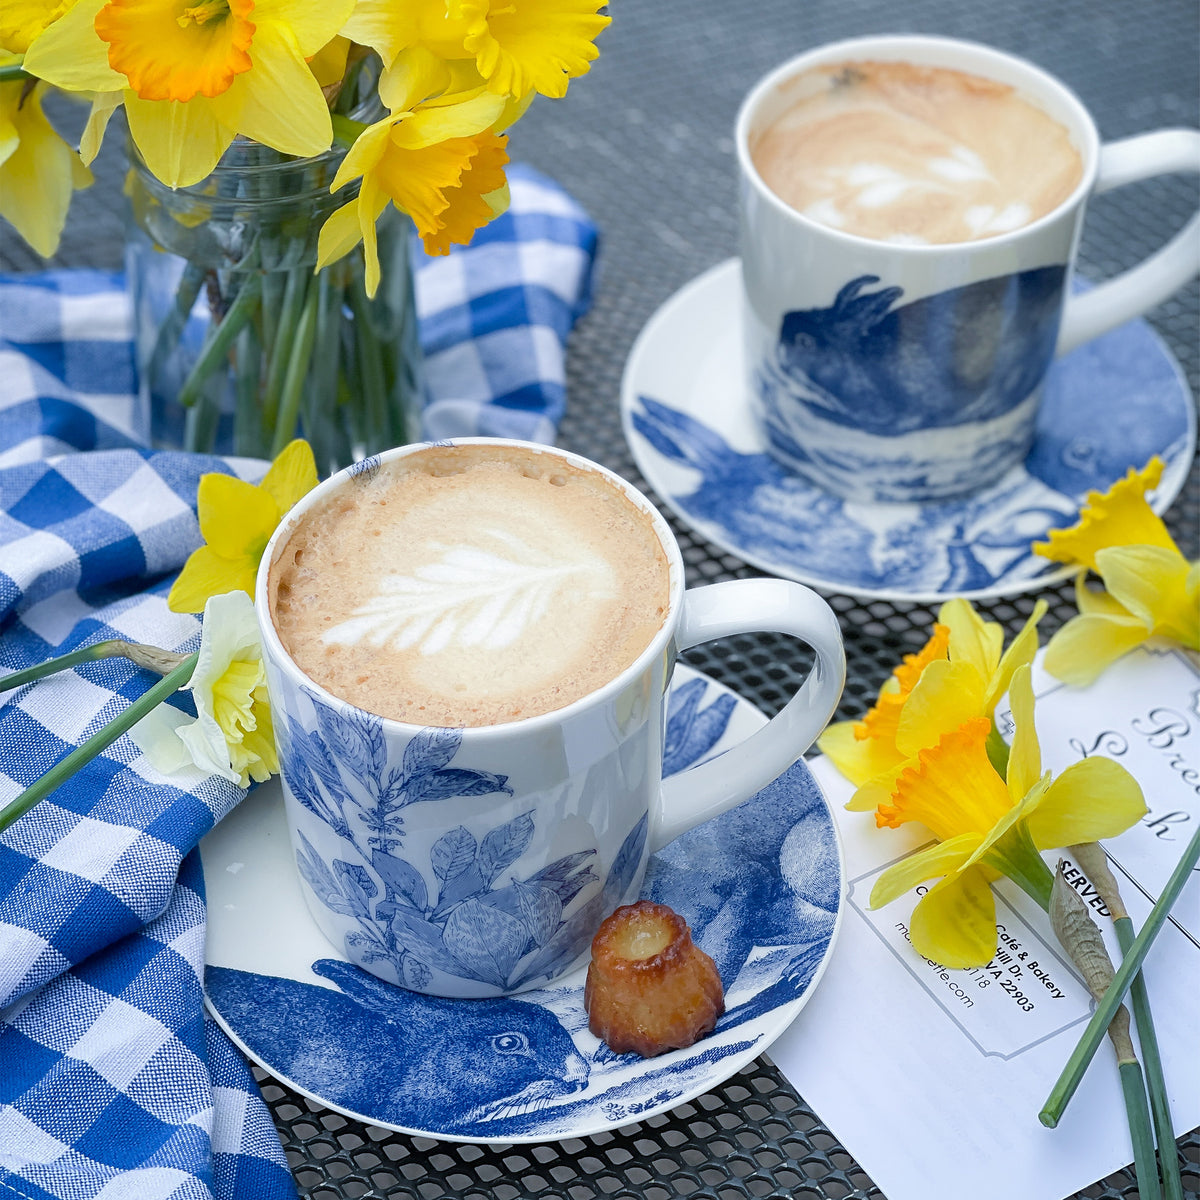 Two cups of cappuccino with latte art in blue floral mugs on matching saucers, set on a table adorned with yellow daffodils, a blue checkered cloth, and a small pastry atop **Bunnies Small Plates by Caskata Artisanal Home**.